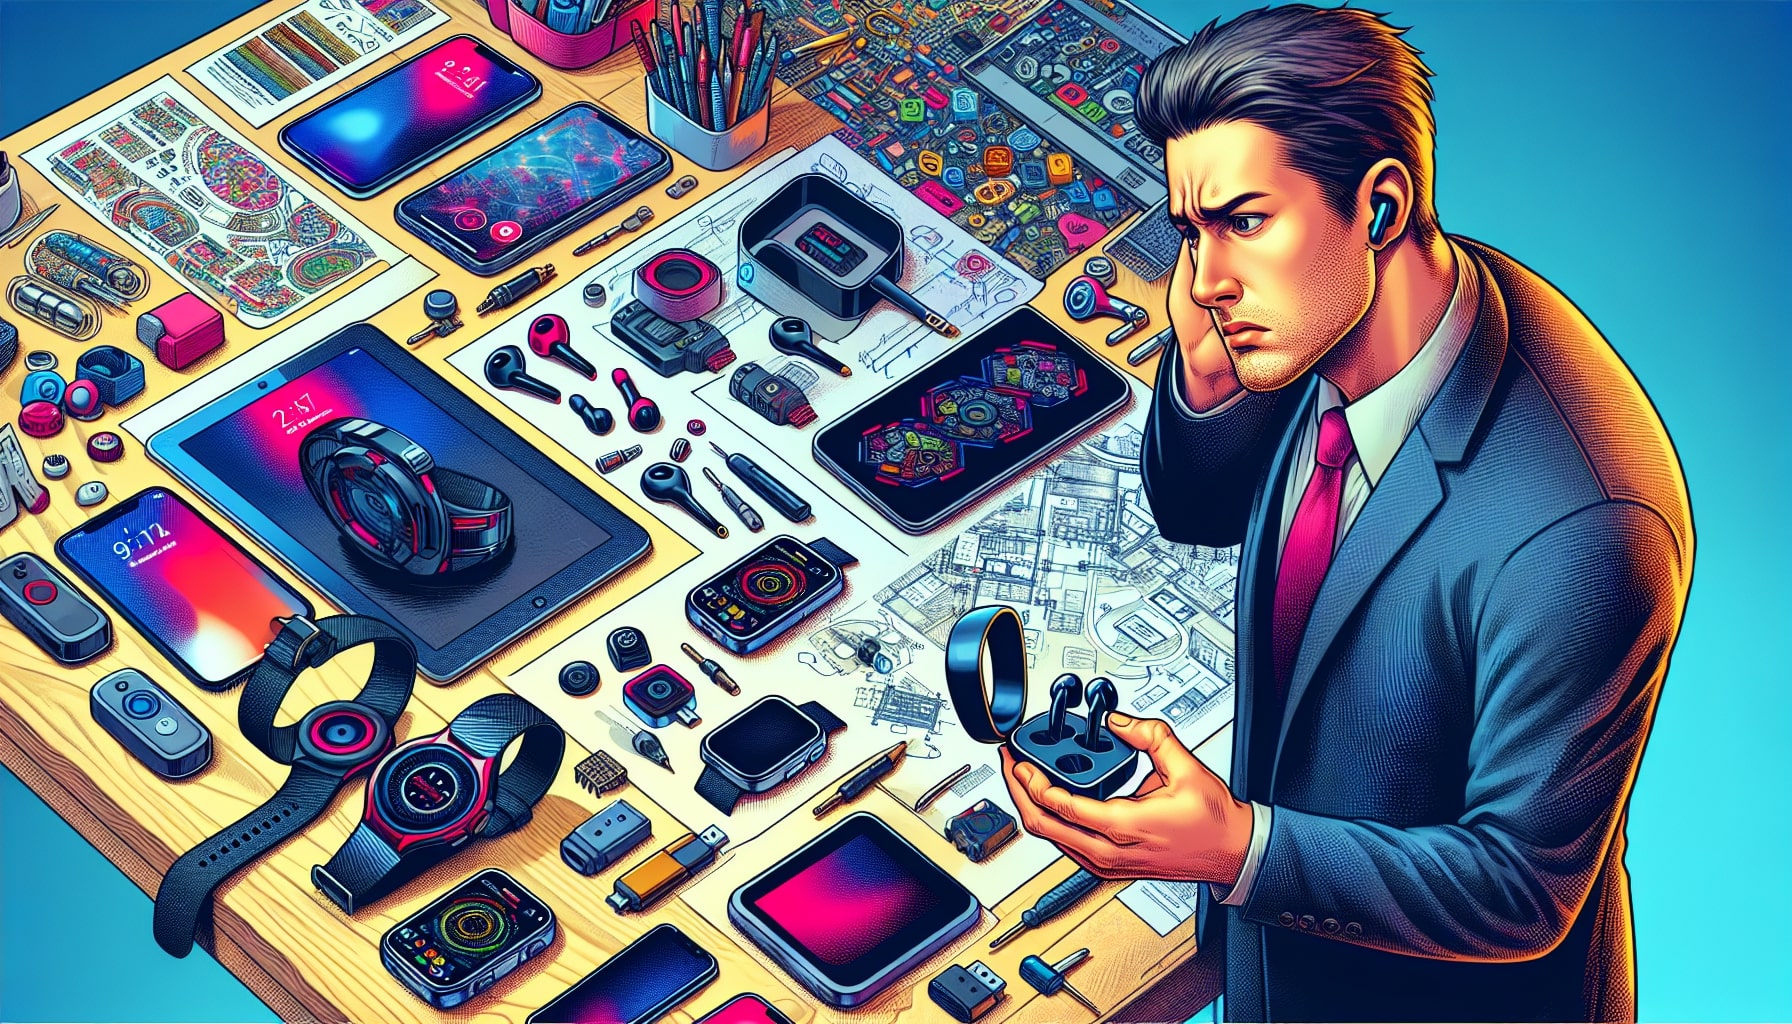 Man with gadgets in colorful technological illustration.